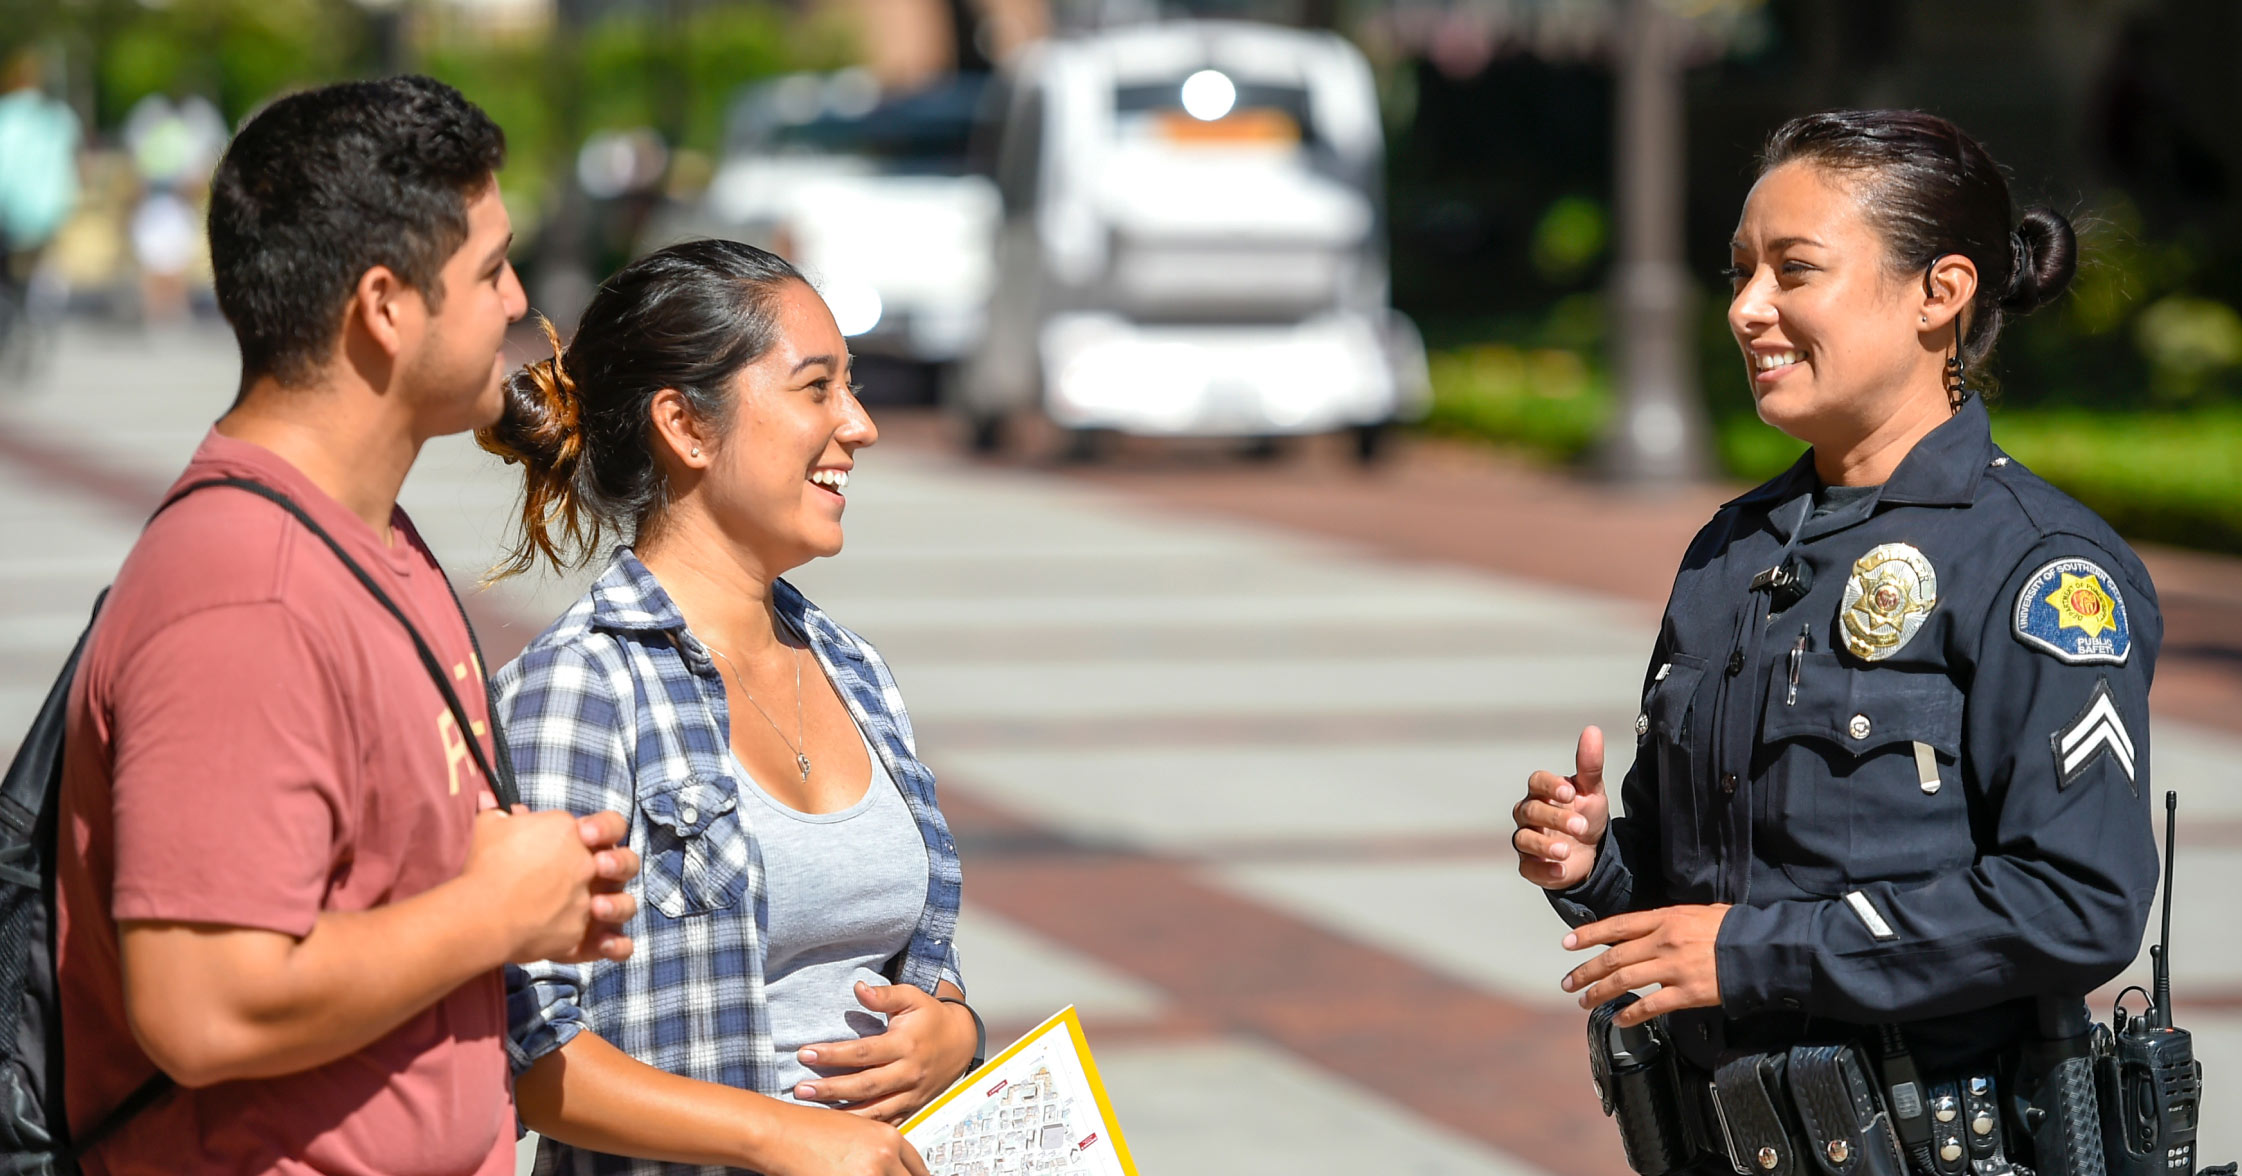 USC Safety Officer smiling and speaking with two students on campus